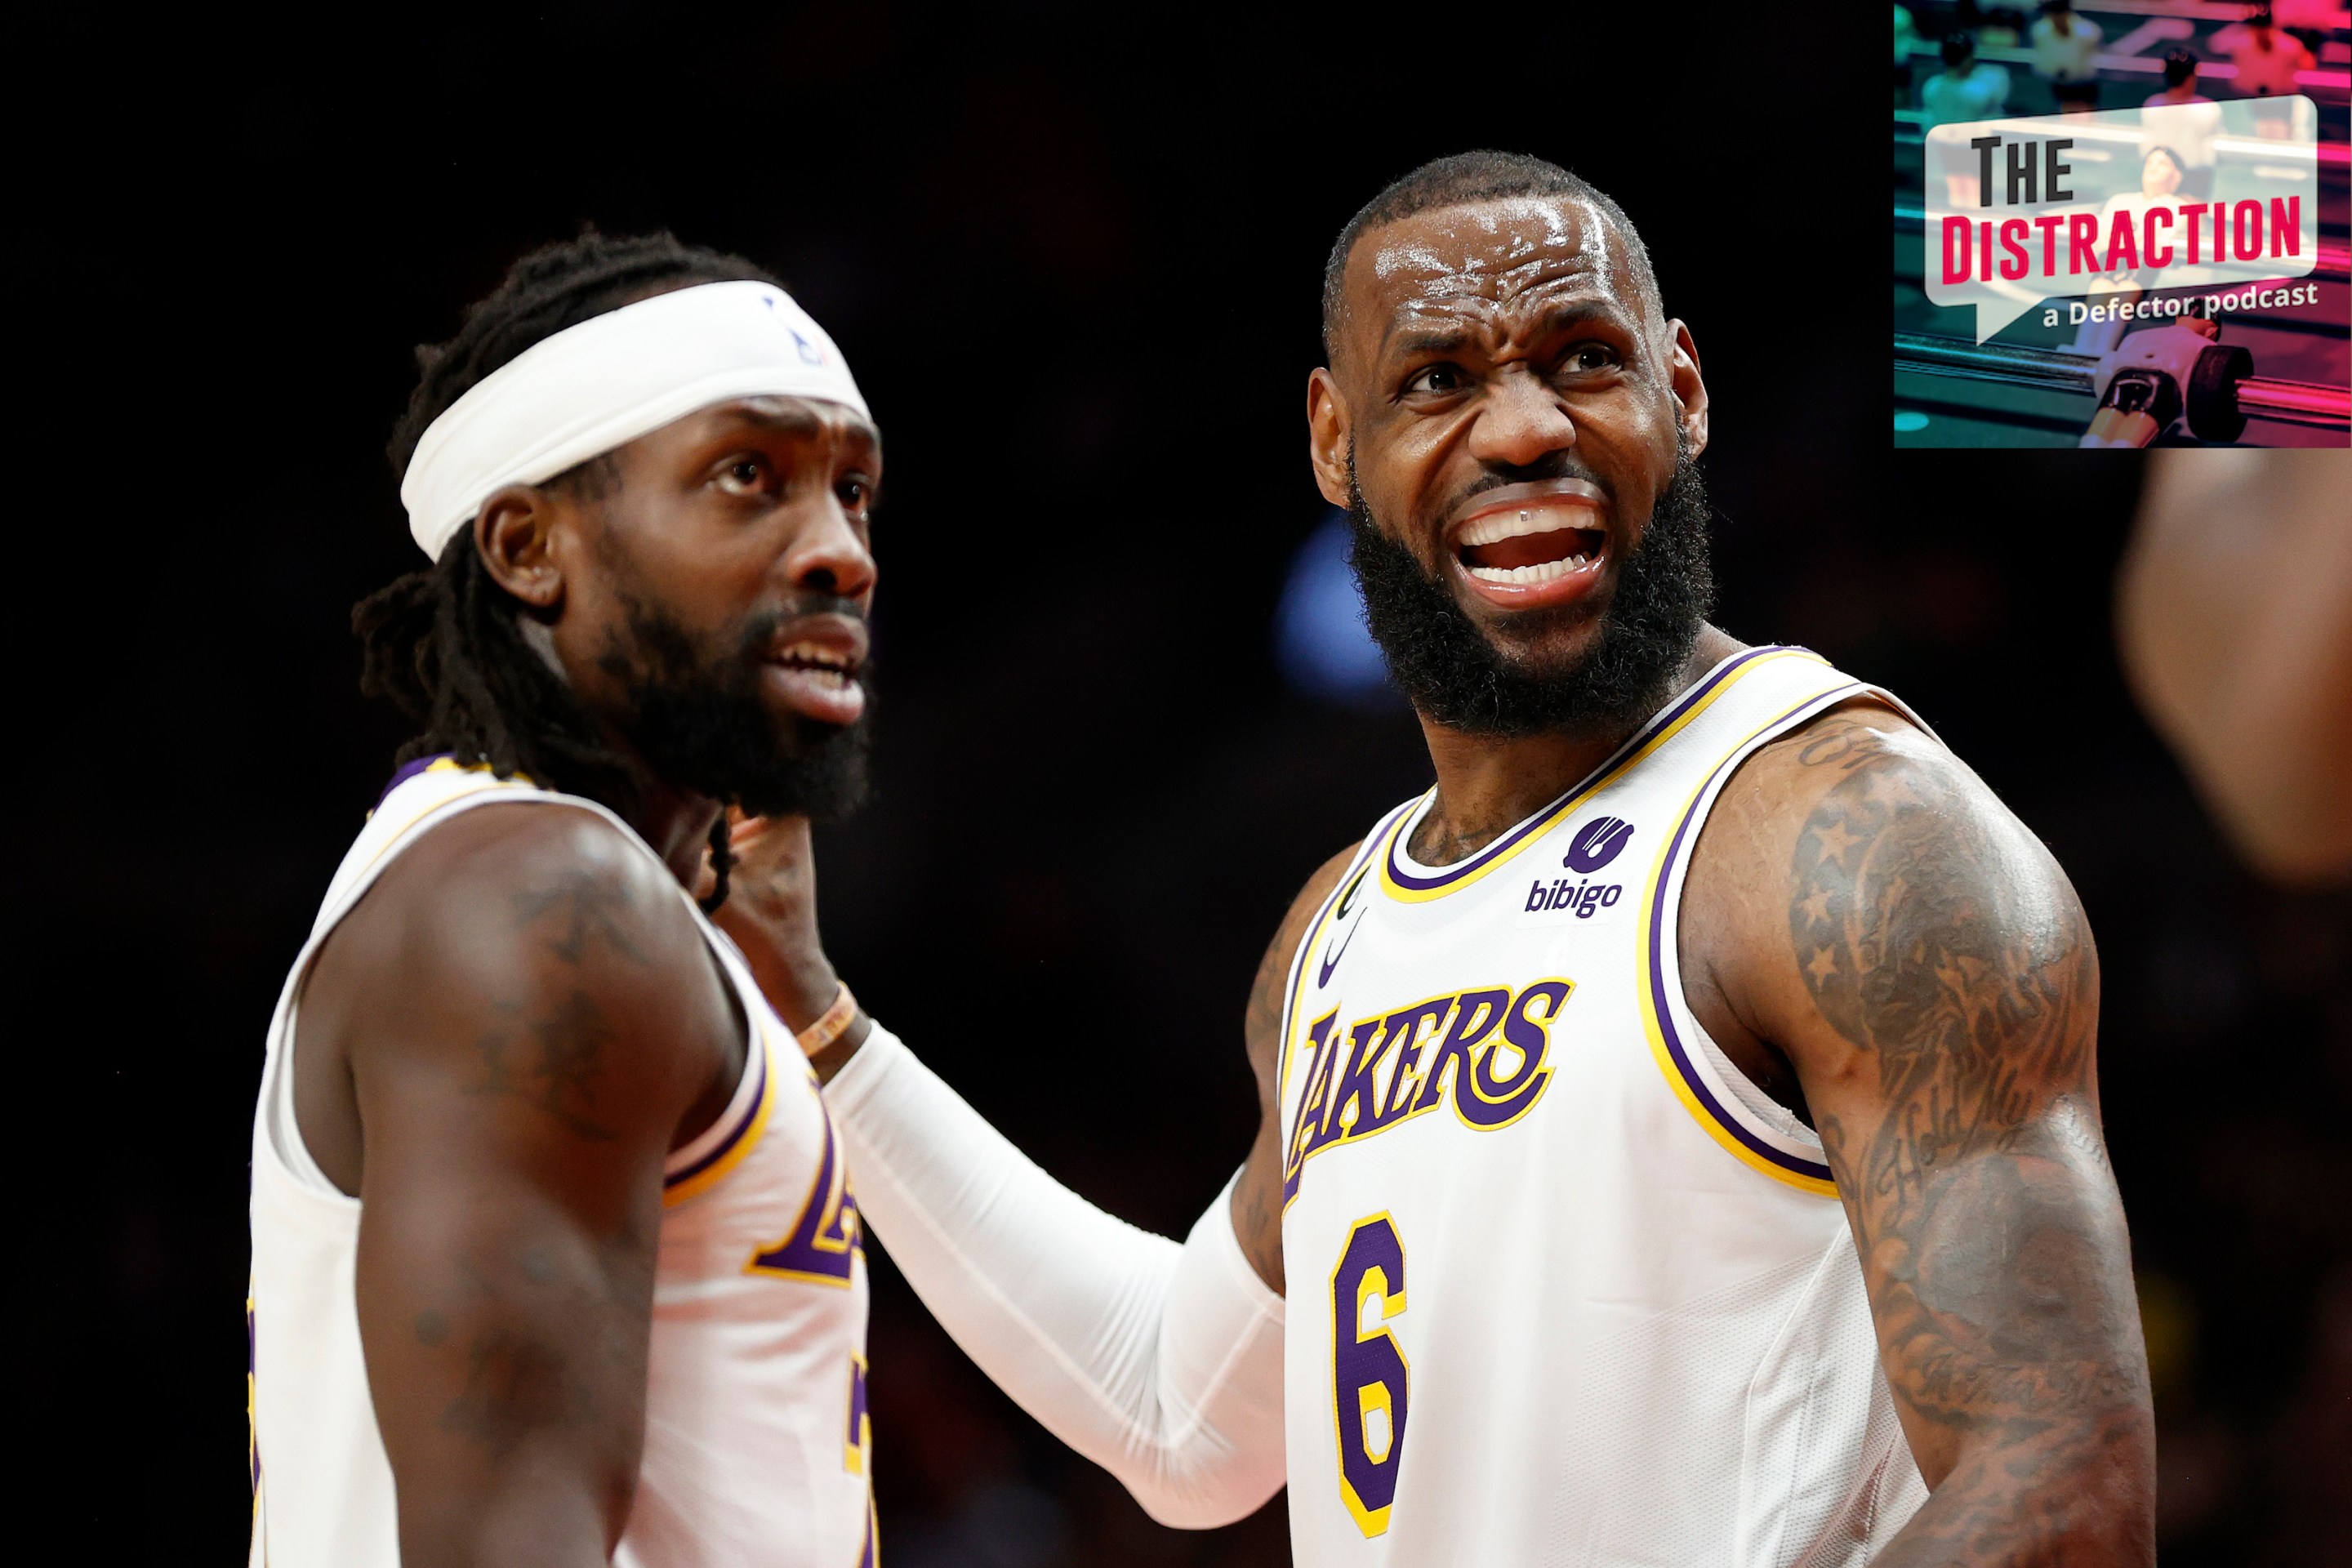 Patrick Beverley and LeBron James look upset during a Los Angeles Lakers game against the Portland Trail Blazers. The Defector logo is in the corner.